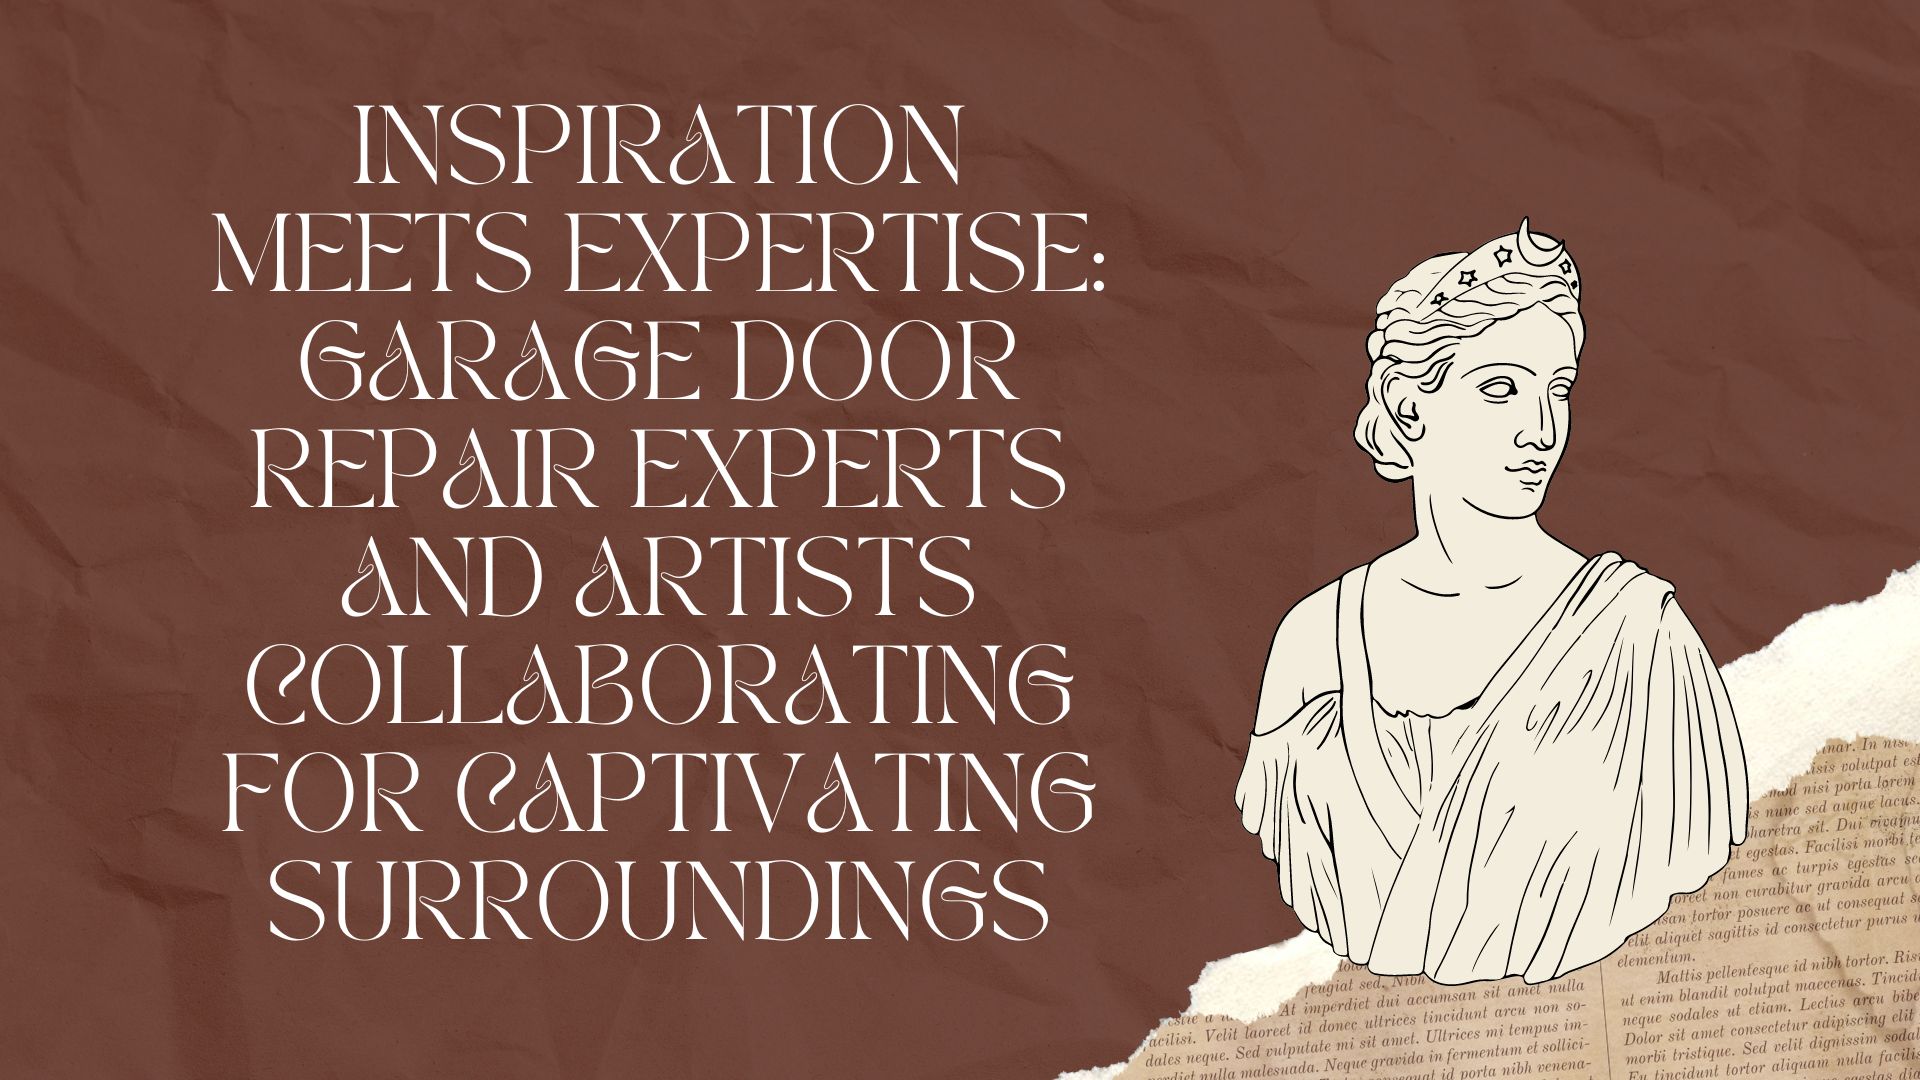 Garage Door Repair Experts and Artists Collaborating for Captivating Surroundings